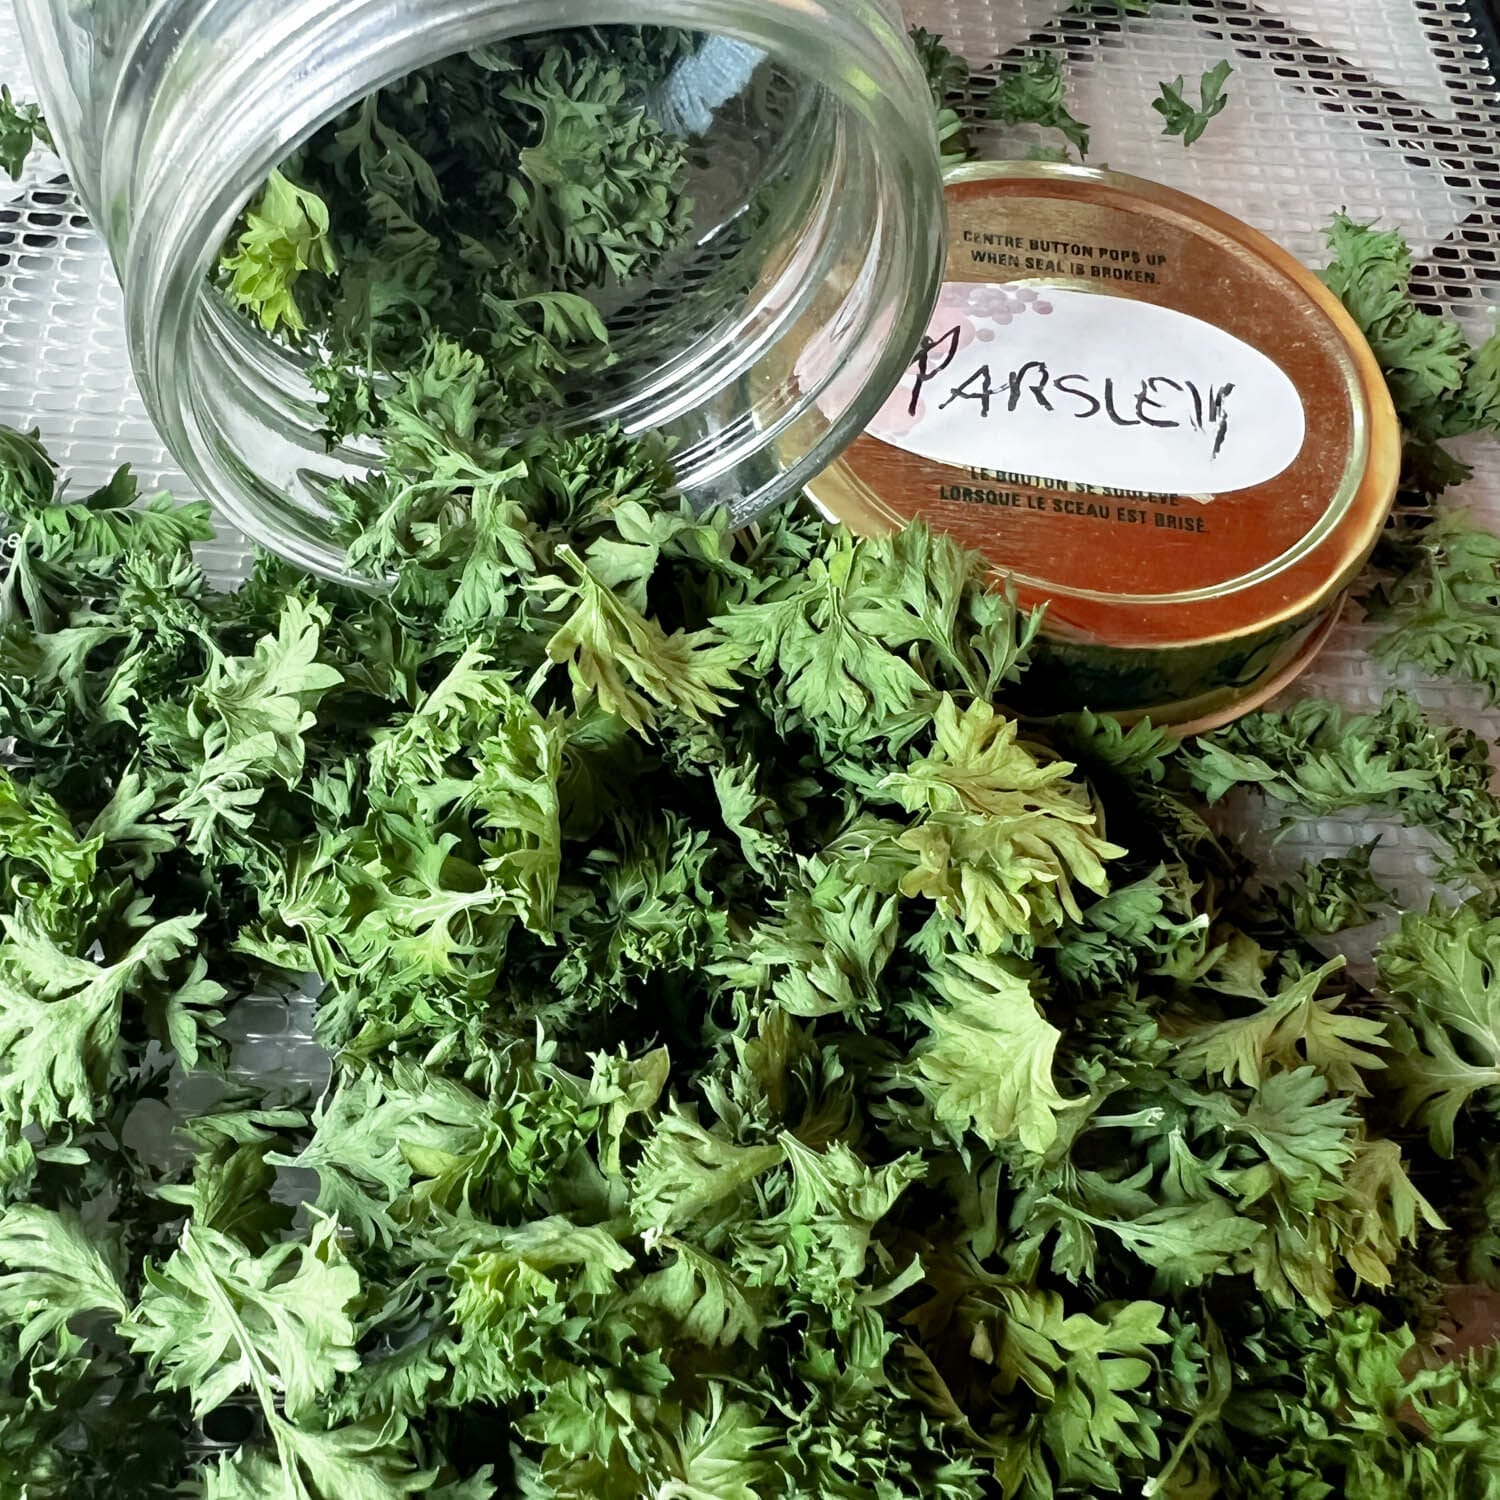 How to Dry Parsley – Using a Dehydrator, Oven, Microwave or Air Drying